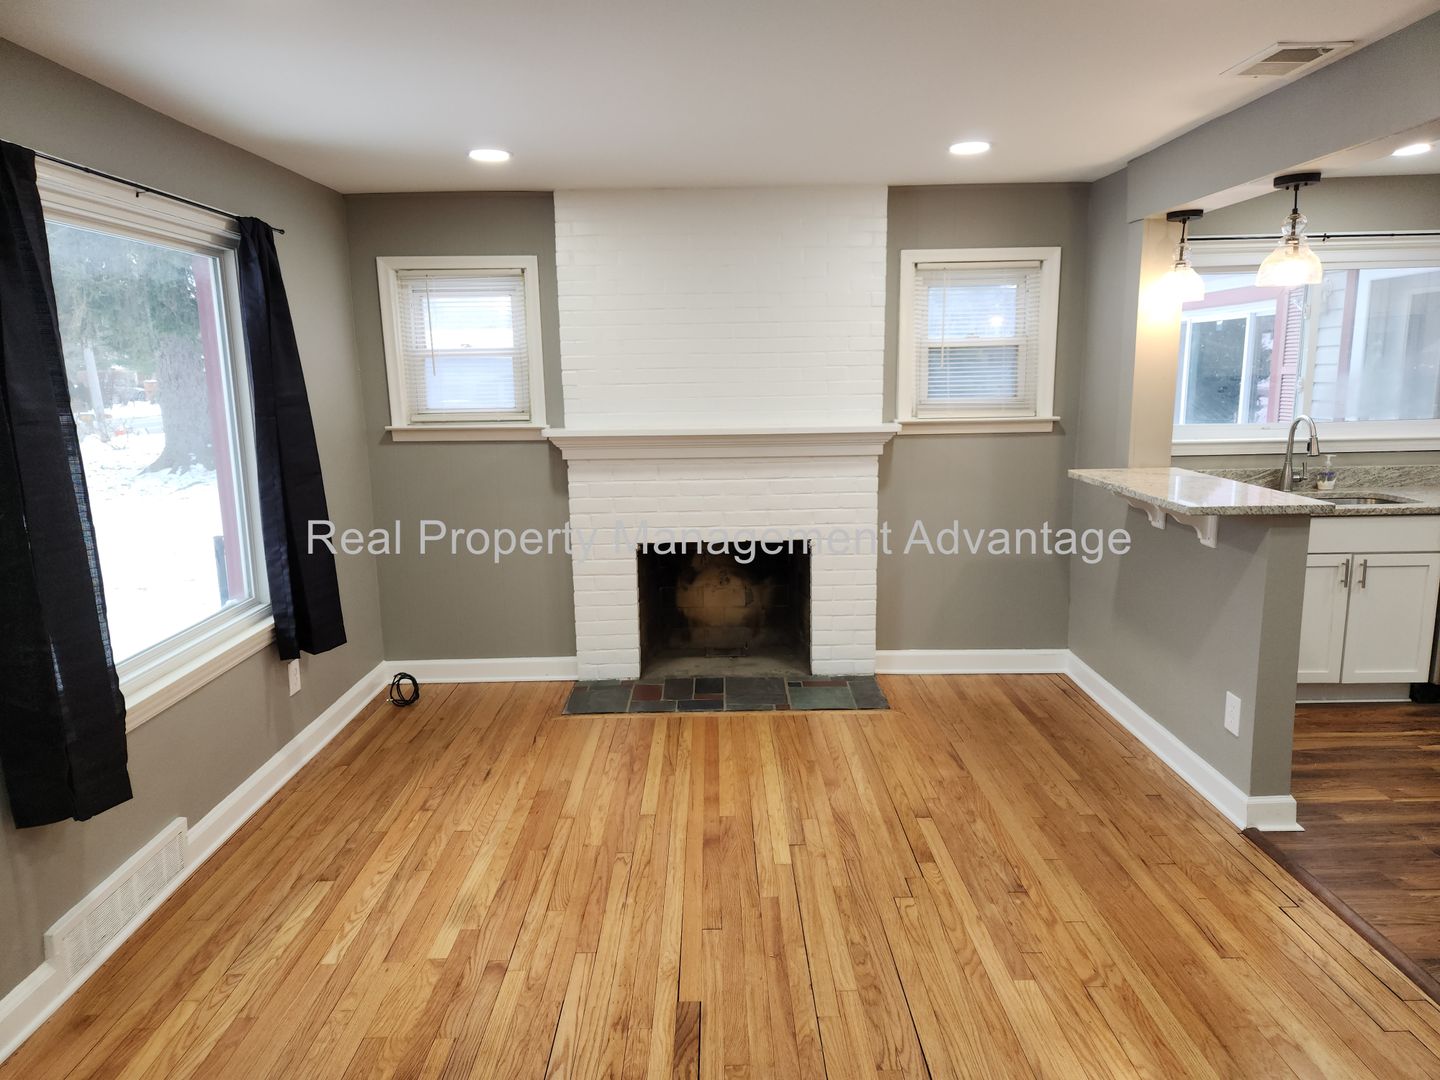 Extensive Renovation with 3 Bedrooms and Two Full Bathrooms!